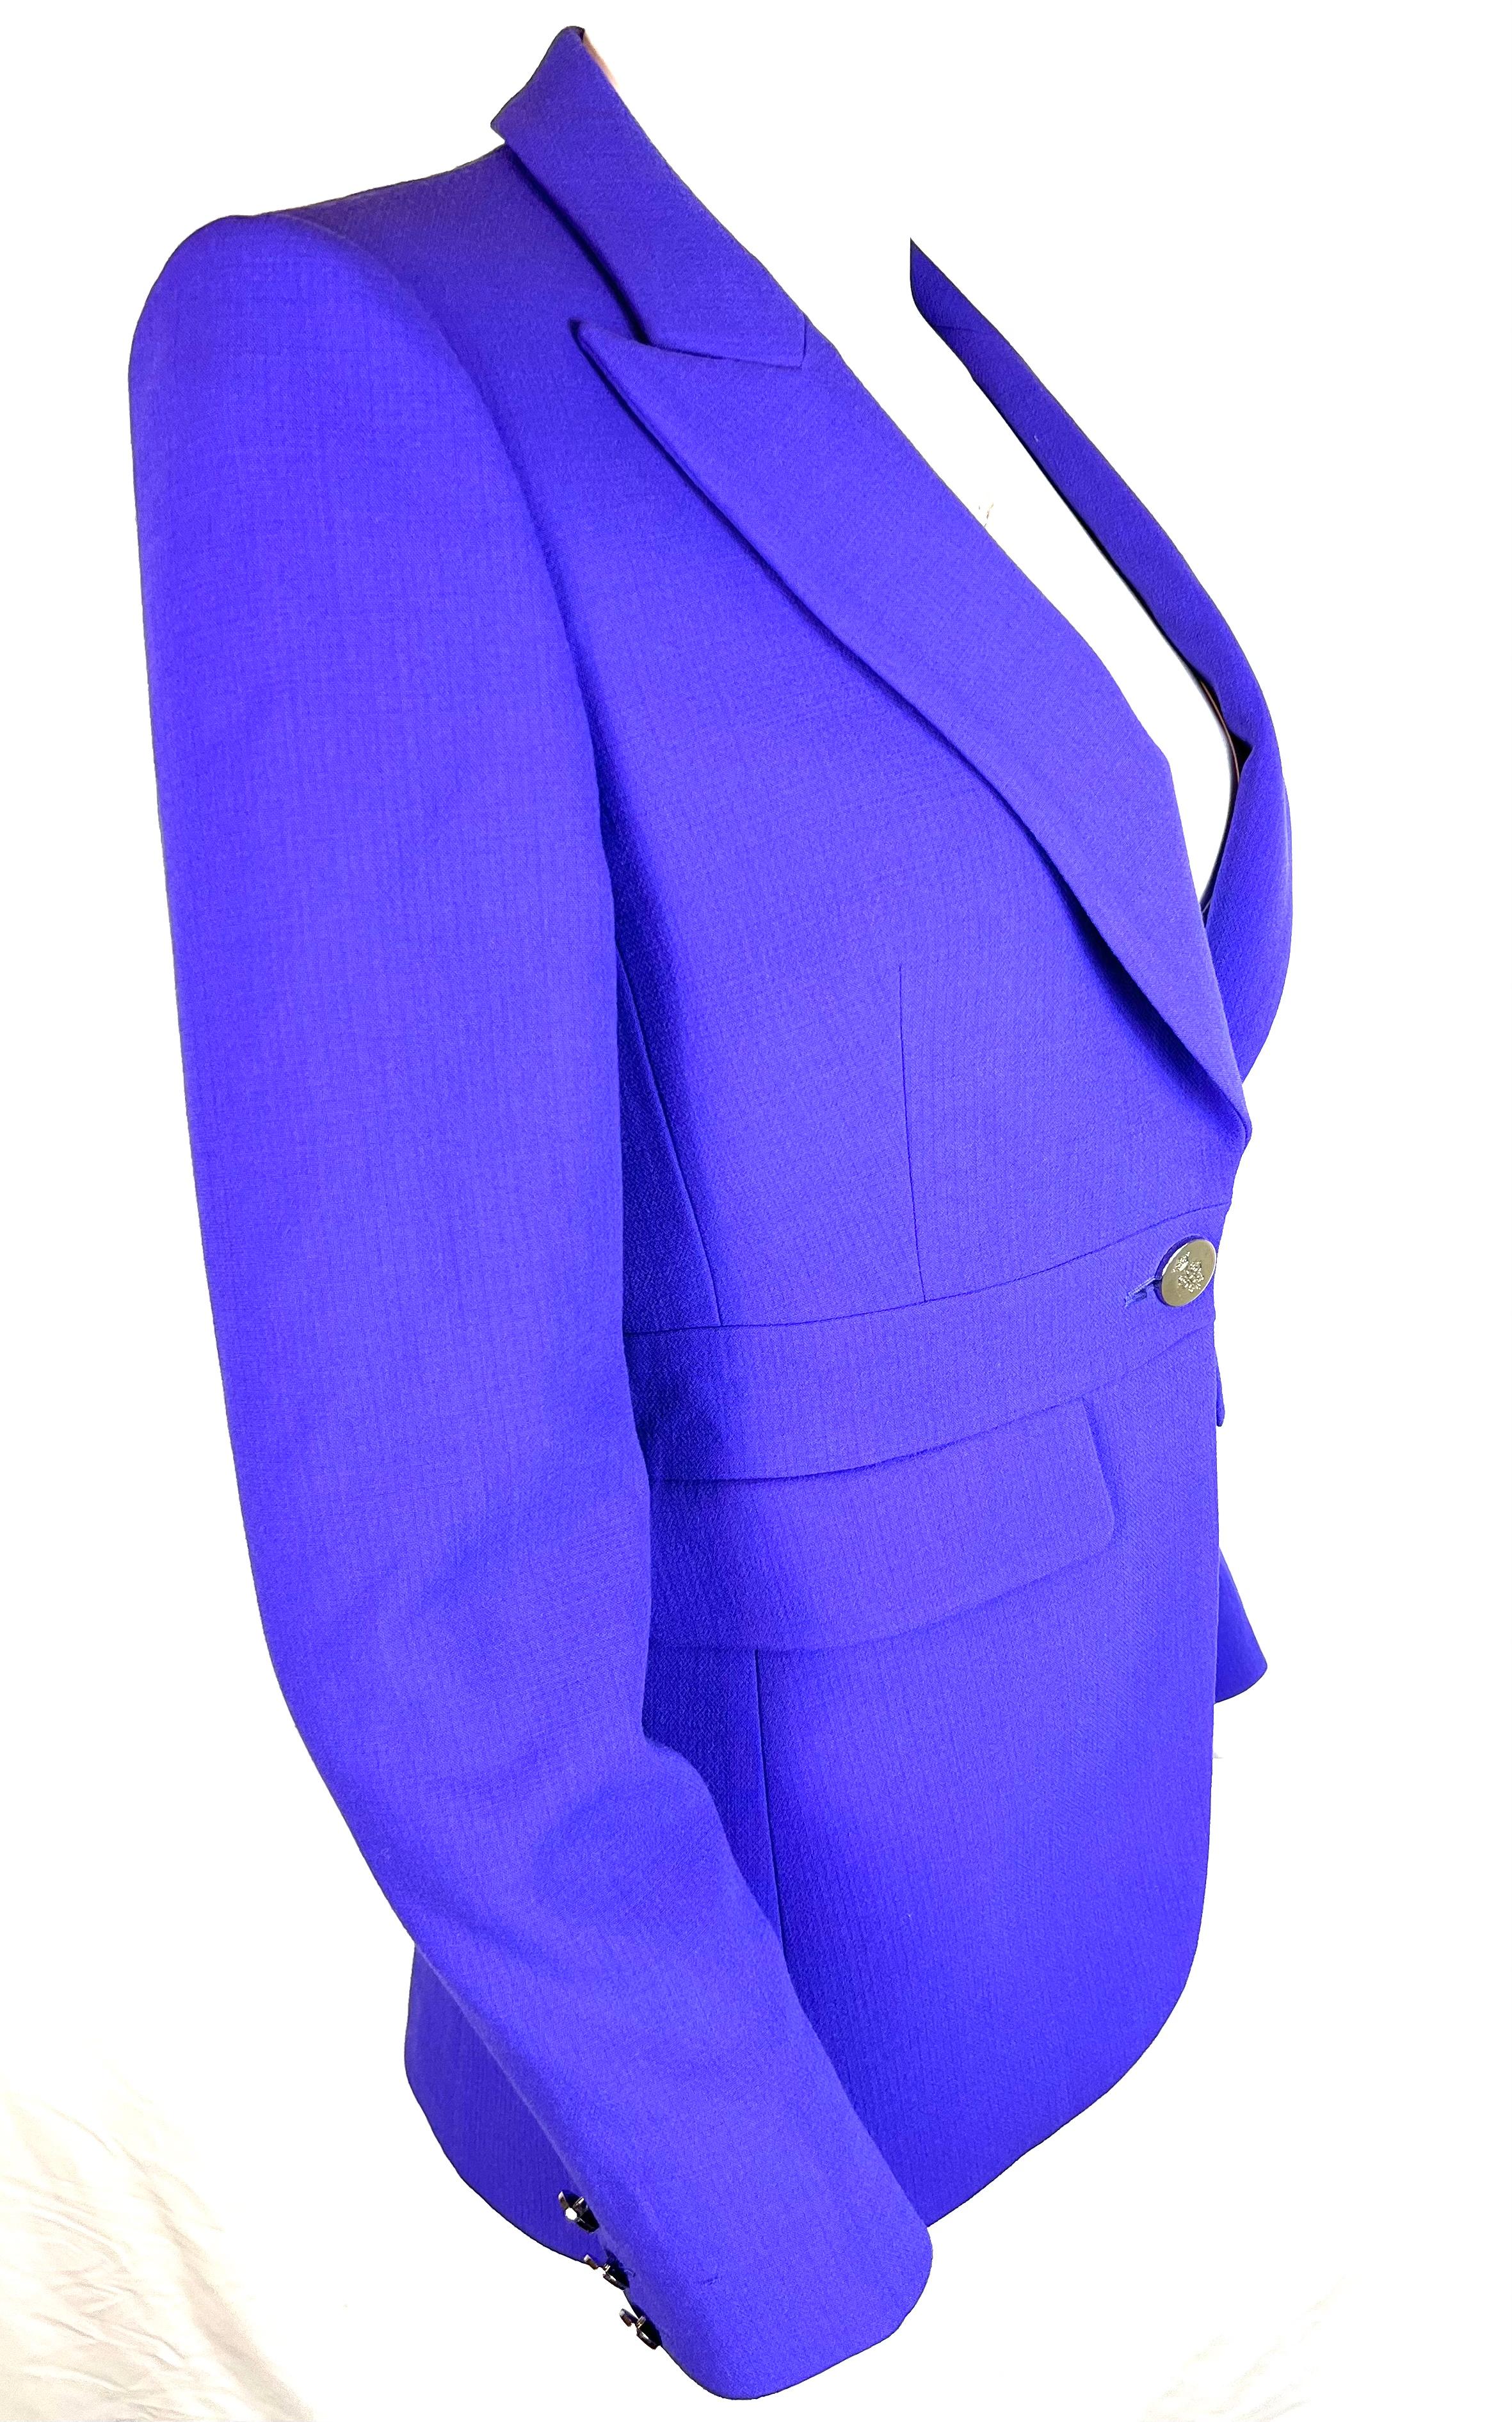 Emilio Pucci Purple Blazer Jacket, Size 8

- Deep v- neck line
- Collar
- Front button closure
- Side pockets
- Buttons detail on the sleeves
- Silver tone hardware
